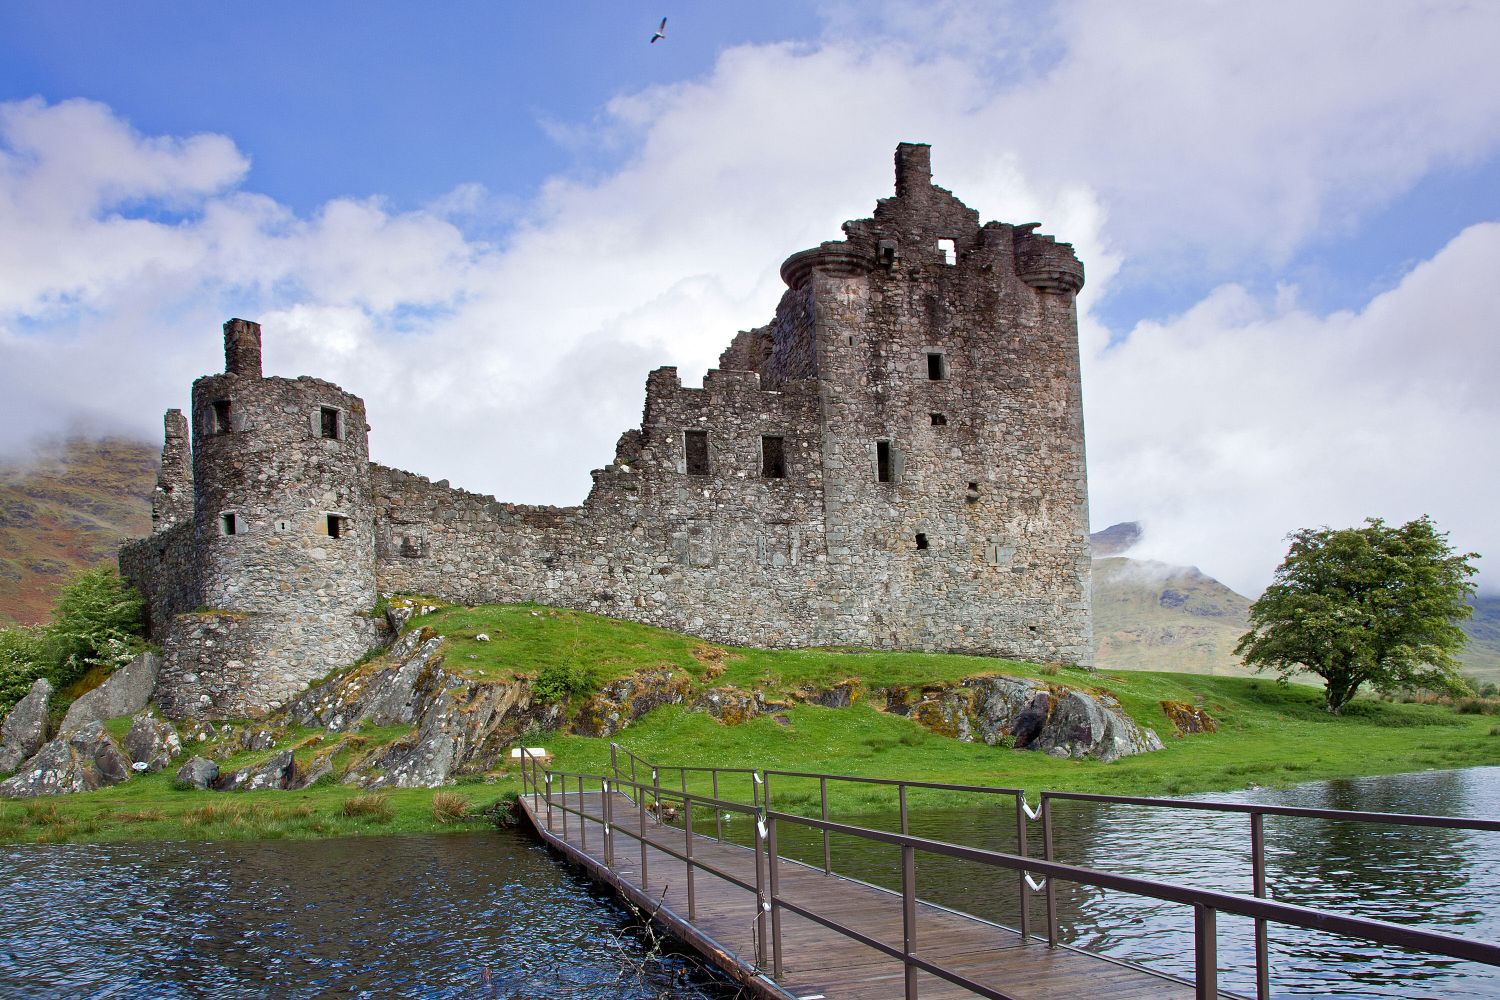 Kilchurn Castle on the shores of Loch Awe